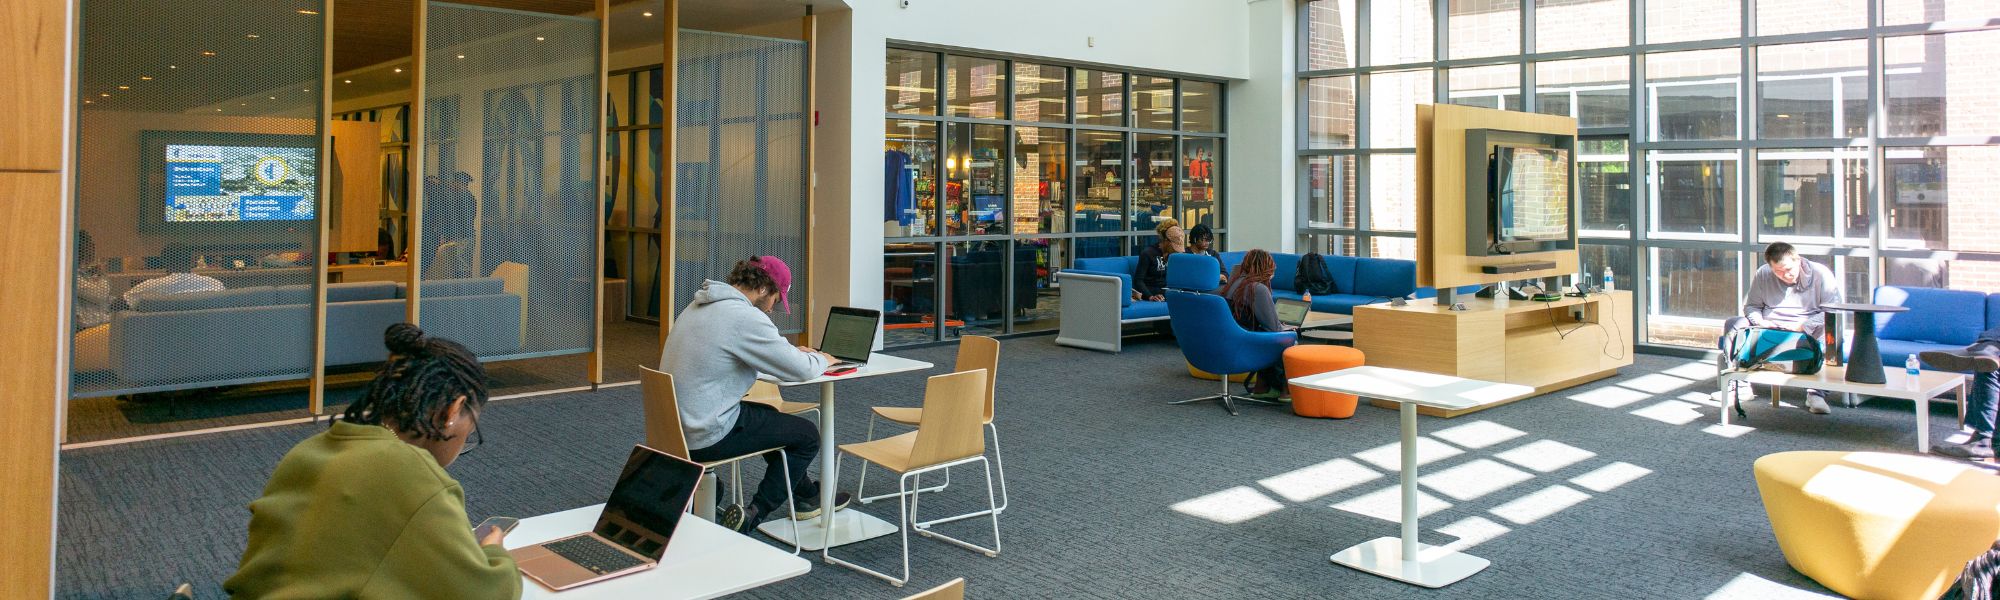 Students studying in quiet Student Union